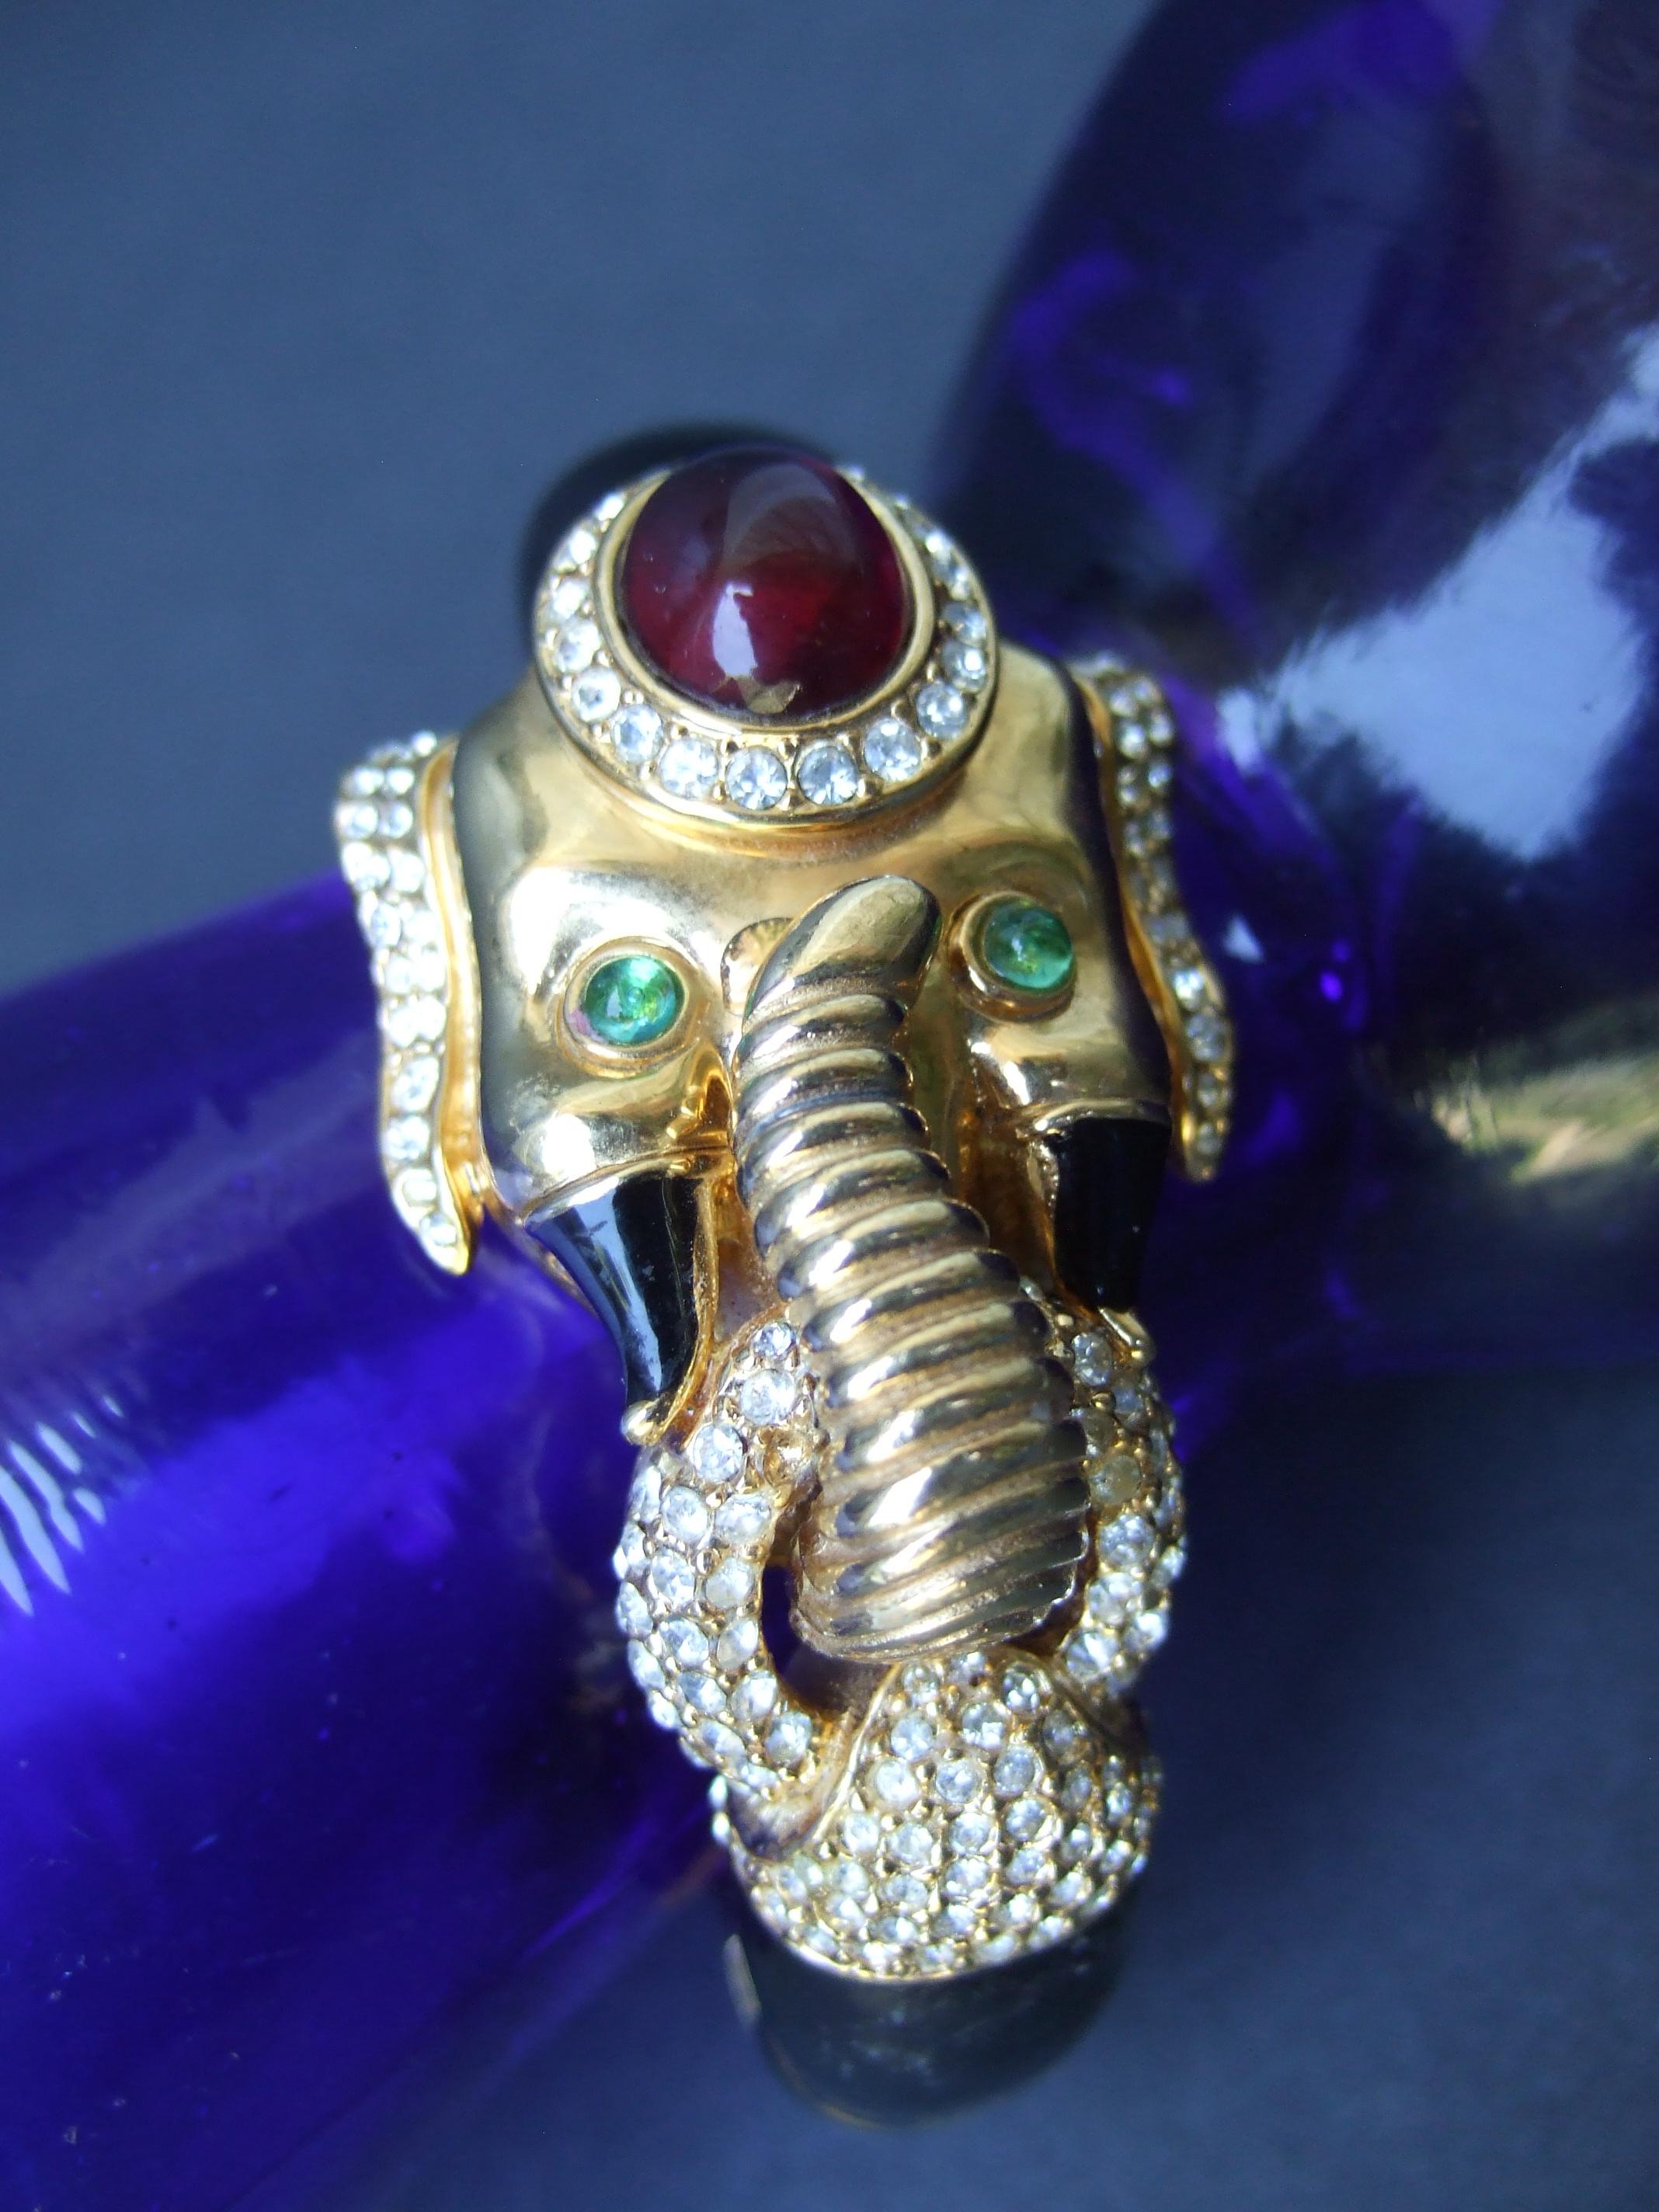 CINER gilt metal black enamel glass jeweled hinged elephant bracelet c 1970s
The opulent bracelet is designed with an exotic elephant adorned with a ruby color
glass cabochon mounted on top the head

Accented with green crystals eyes & clusters of